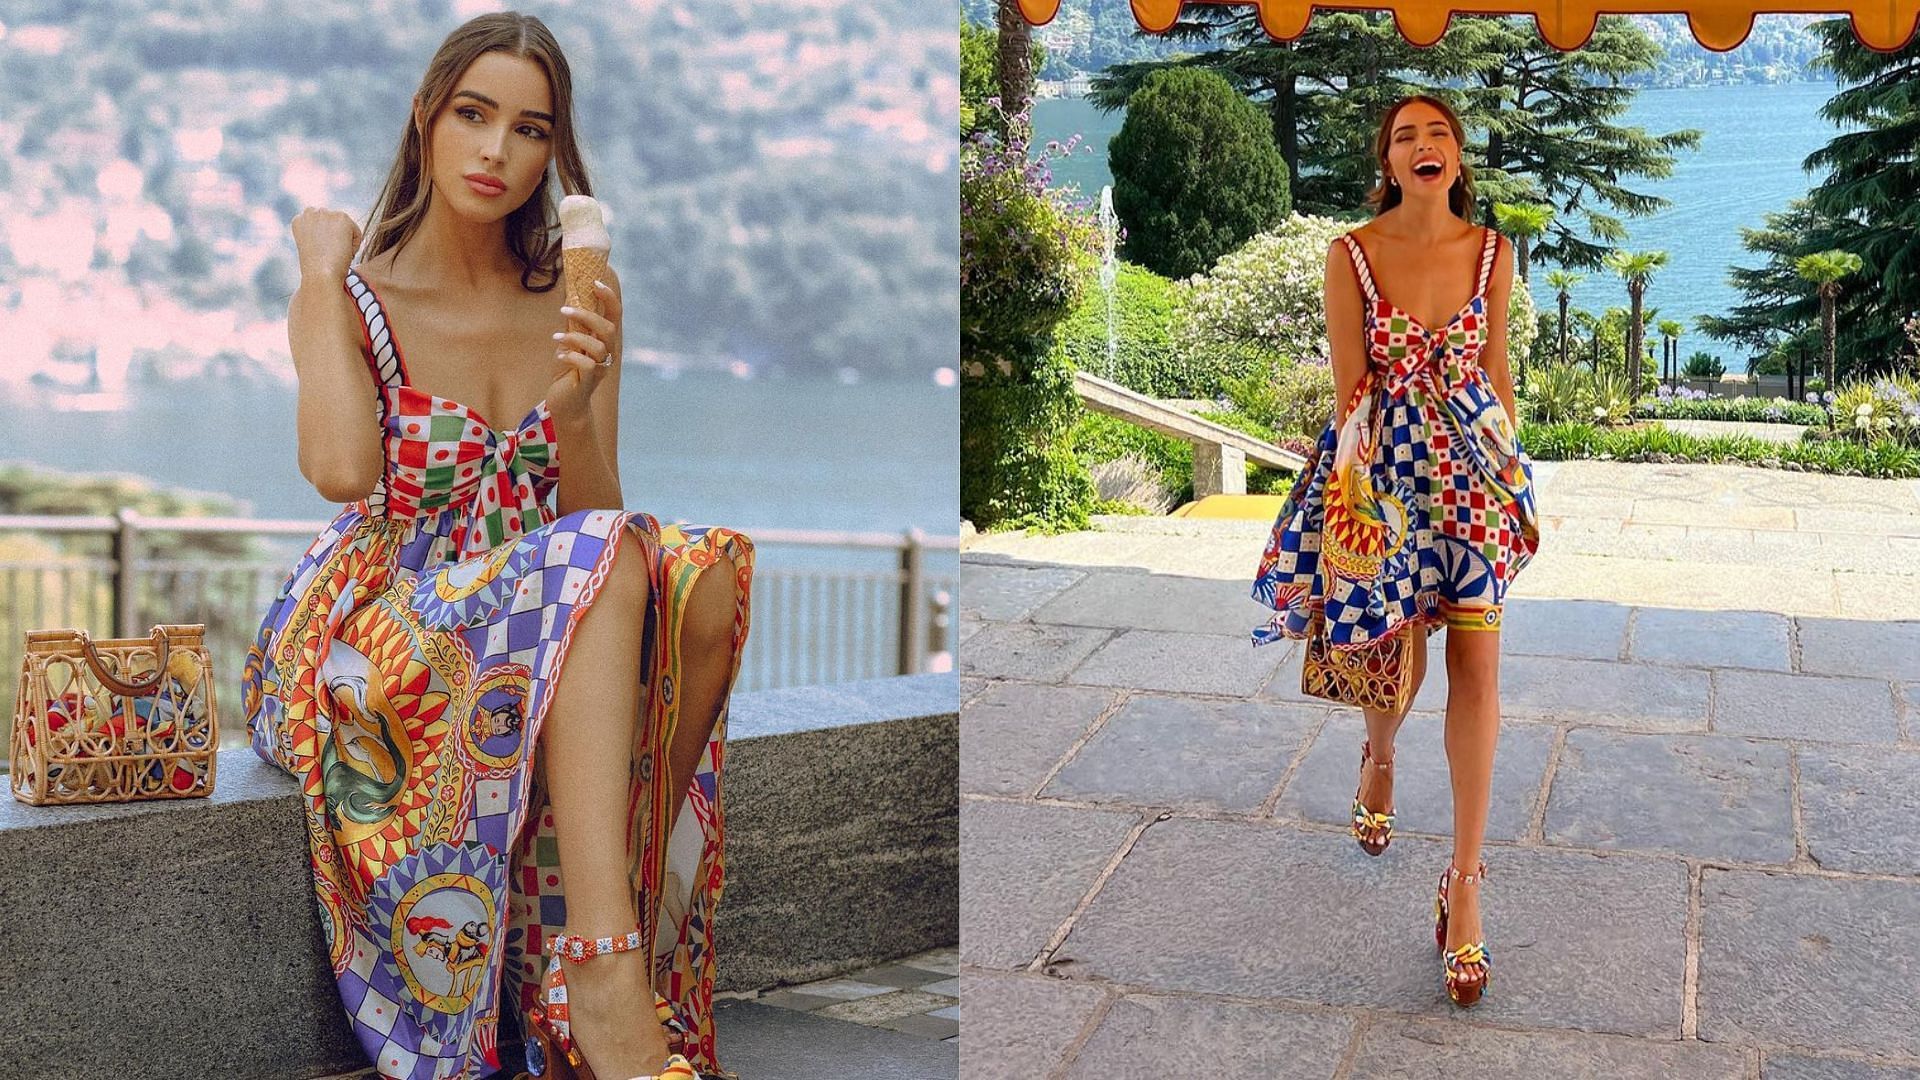 Olivia Culpo shares playful pictures. 